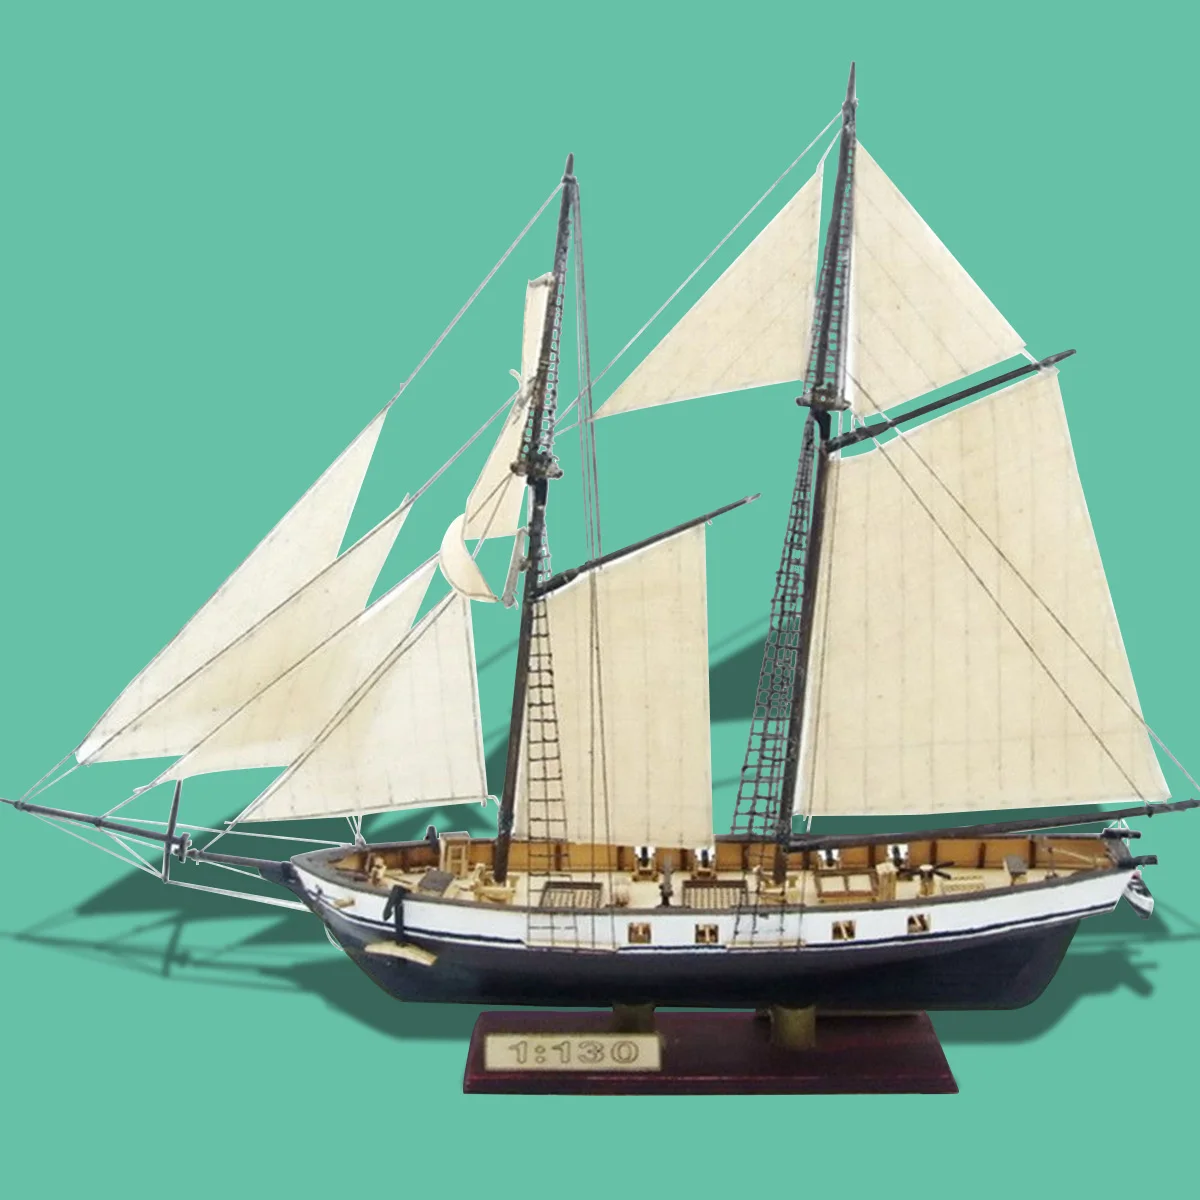 Ship Assembly Model Classical Wooden Sailing Boat Scale Decoration Wood DIY Kits for sale online 